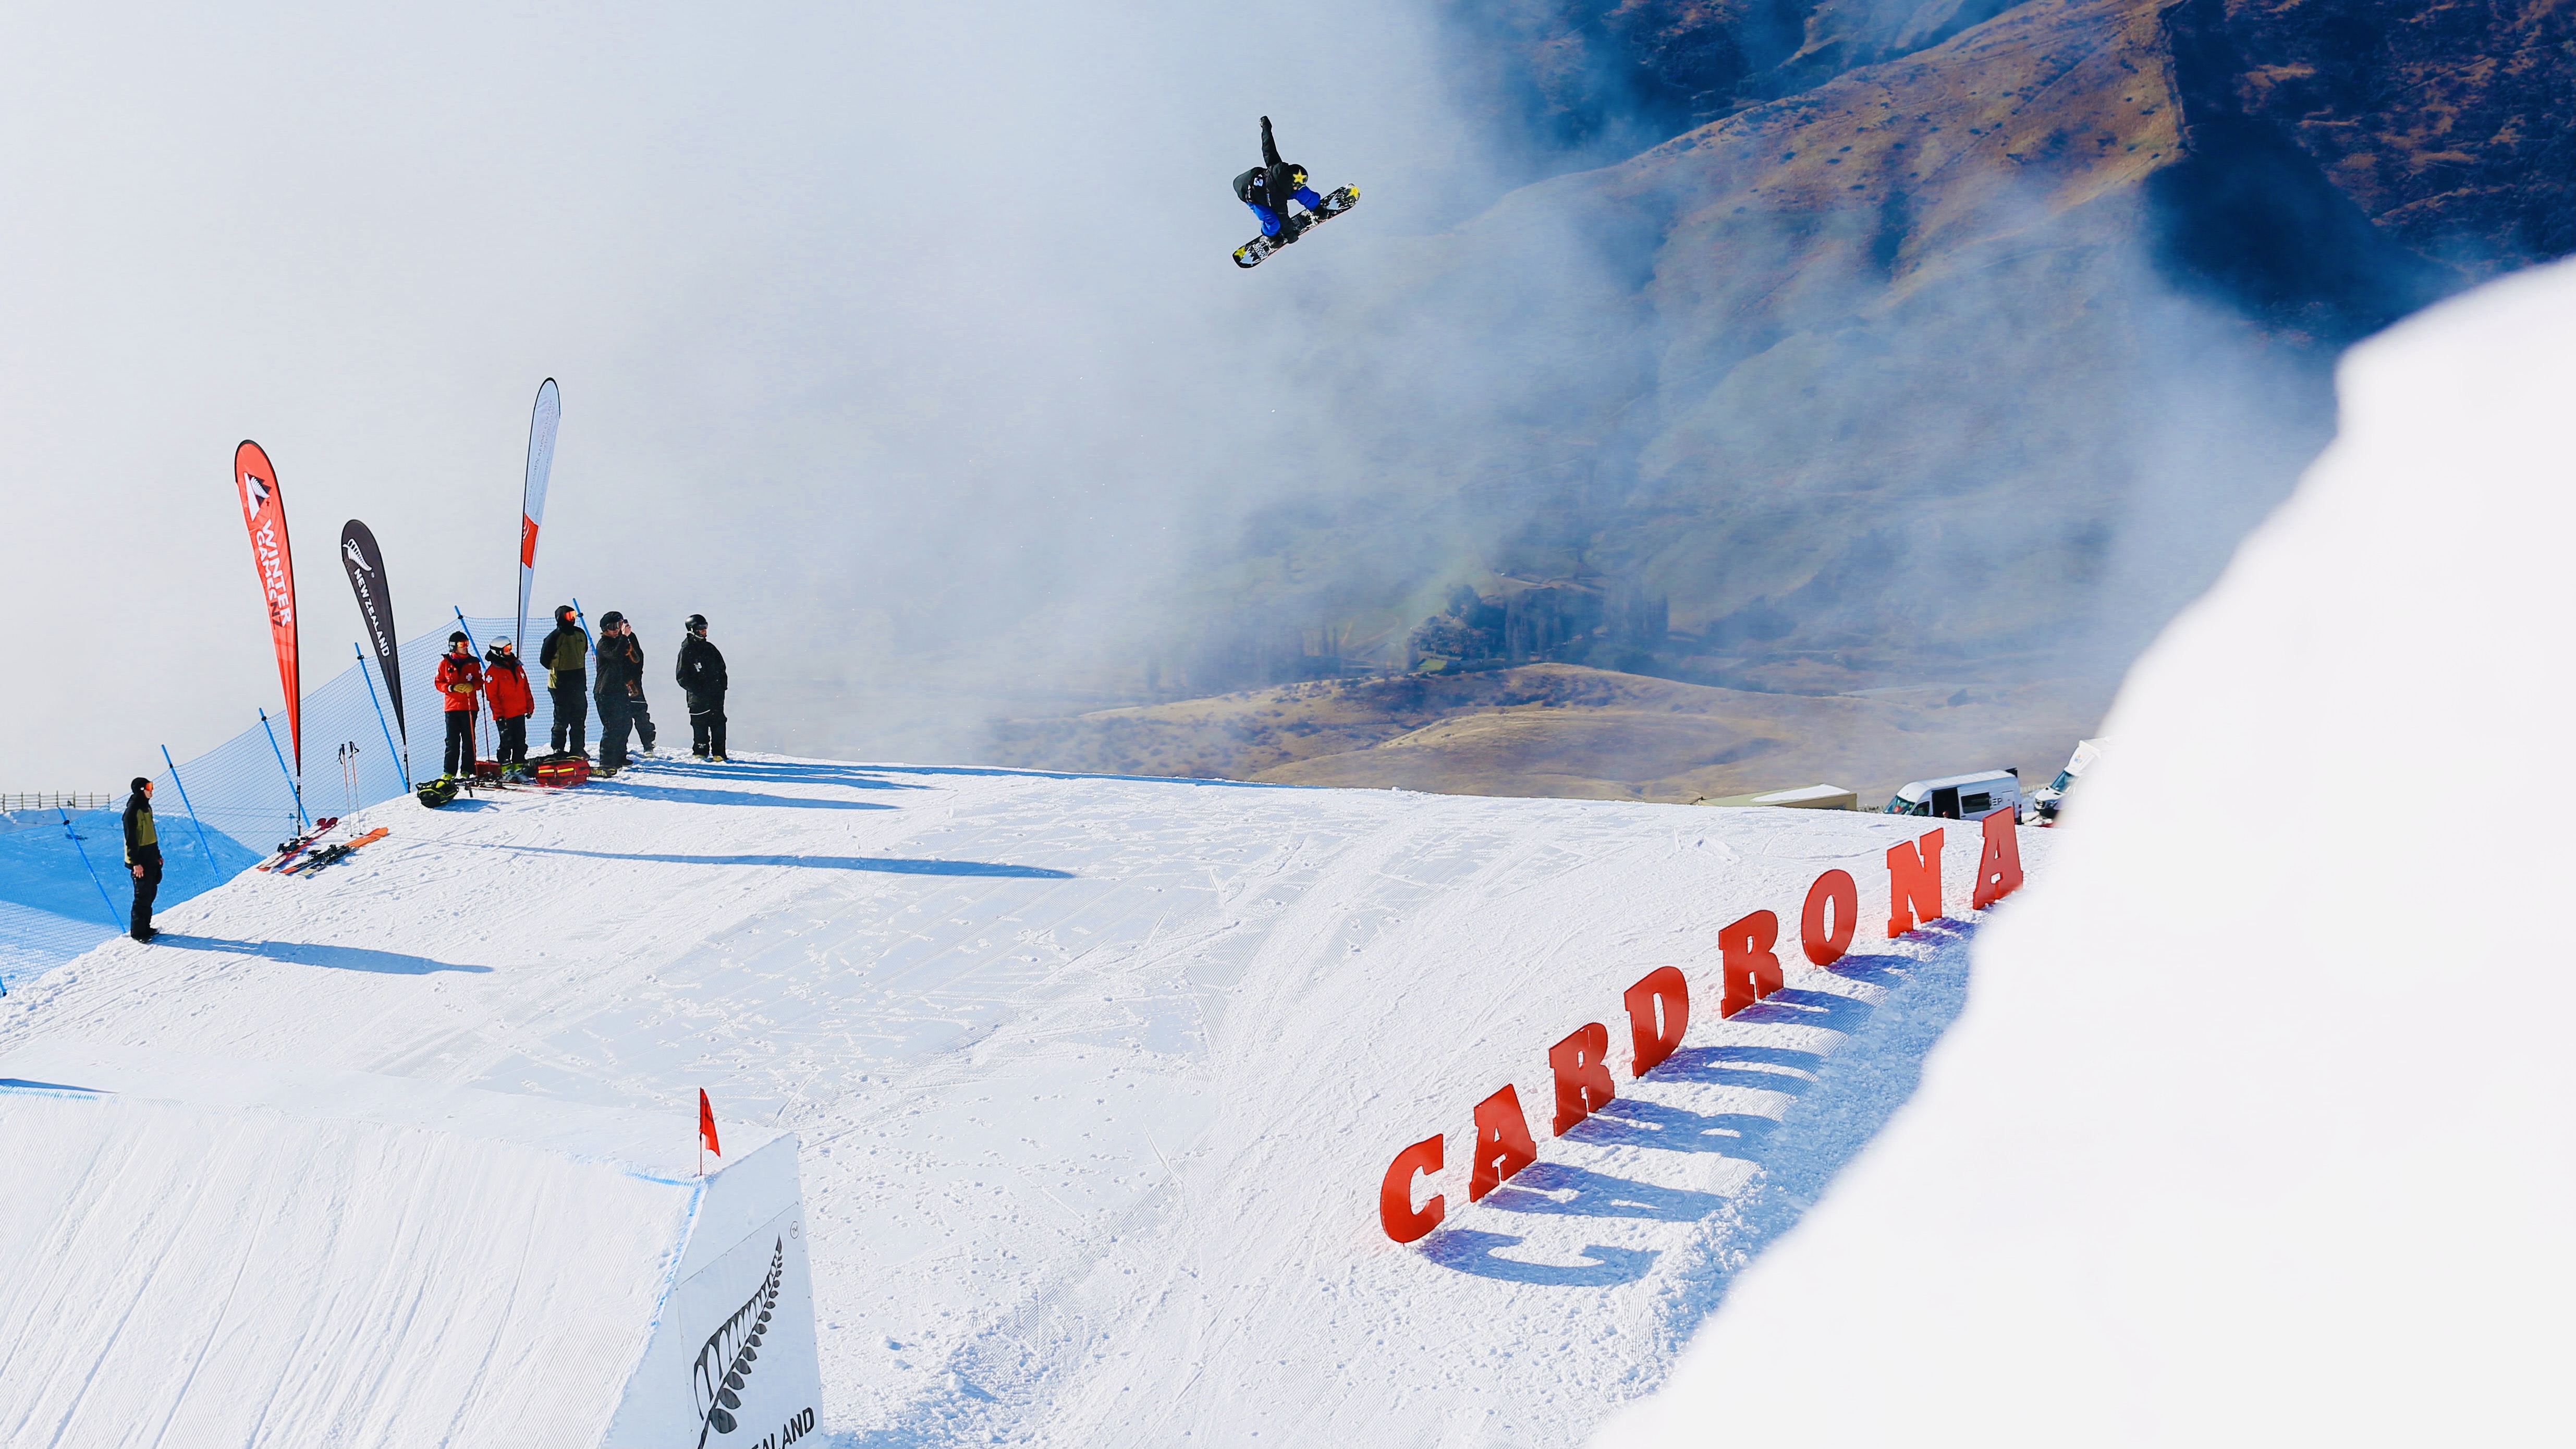 Preview: Early Look at World Cup 24/25: Cardrona Competitions Poised to Kick Off Olympic Qualification Efforts